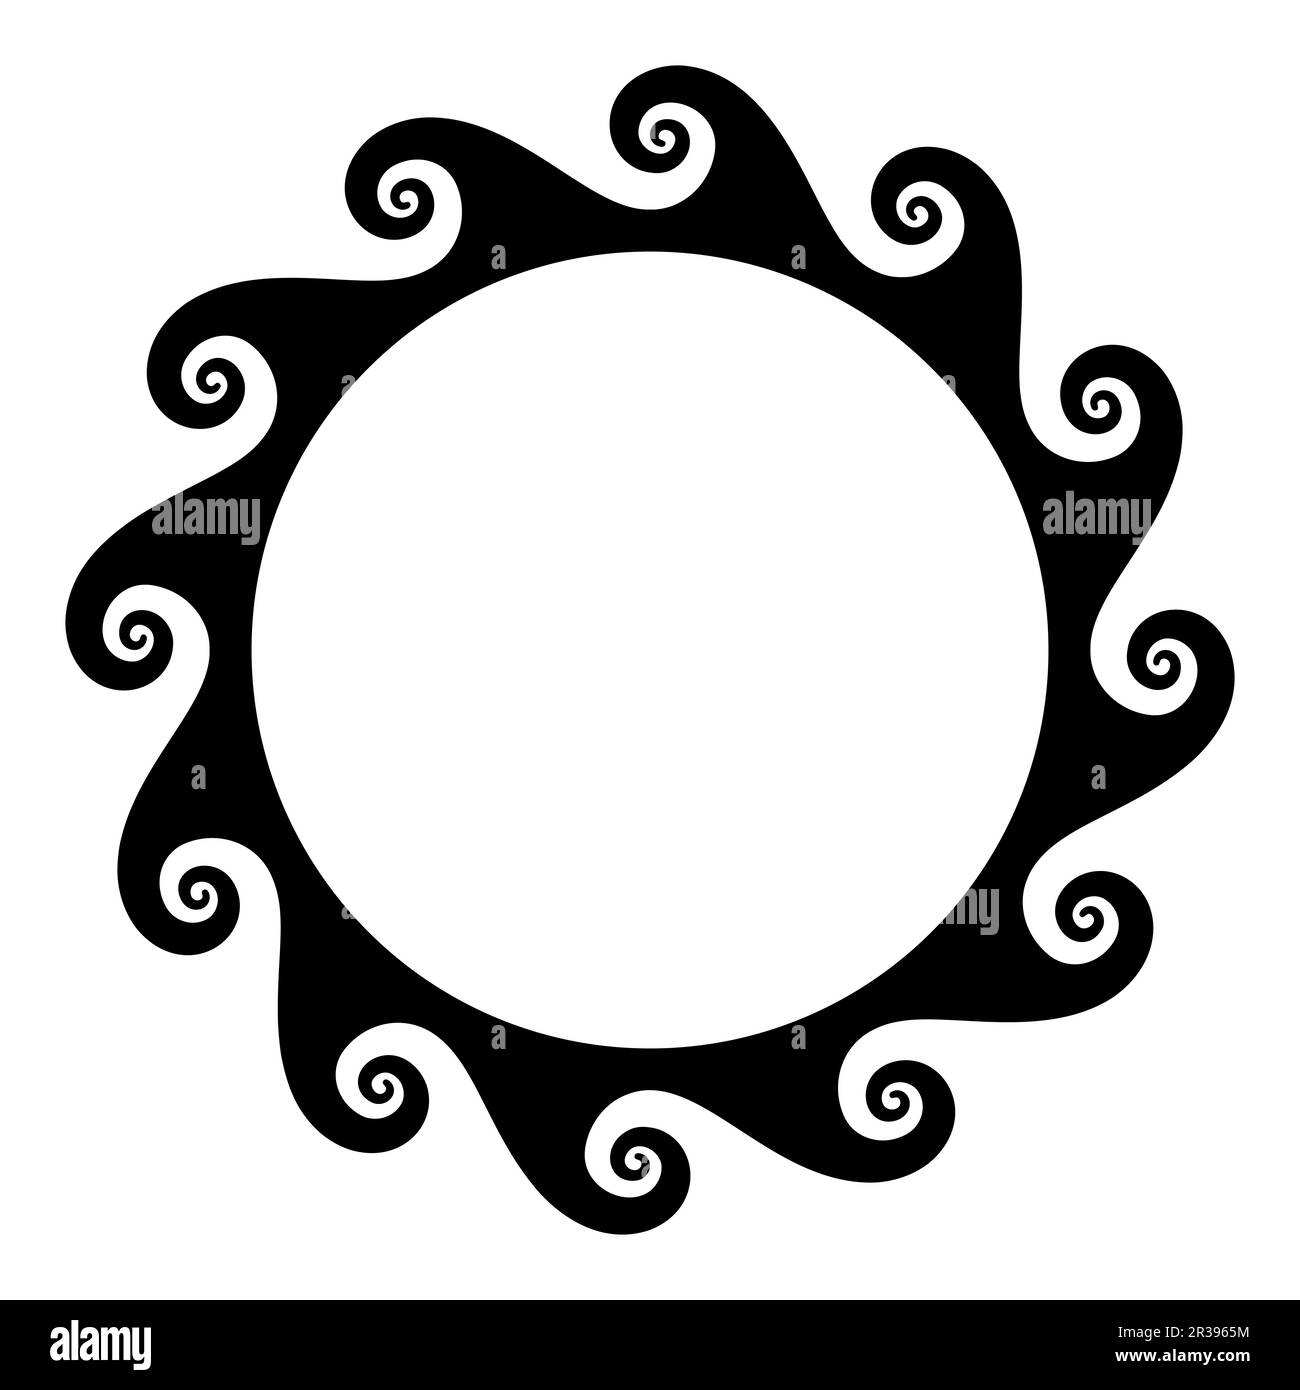 Vitruvian wave pattern, circle frame with seamless meander design, also known as running dog or scroll pattern, a repeated motif with twelve spirals. Stock Photo